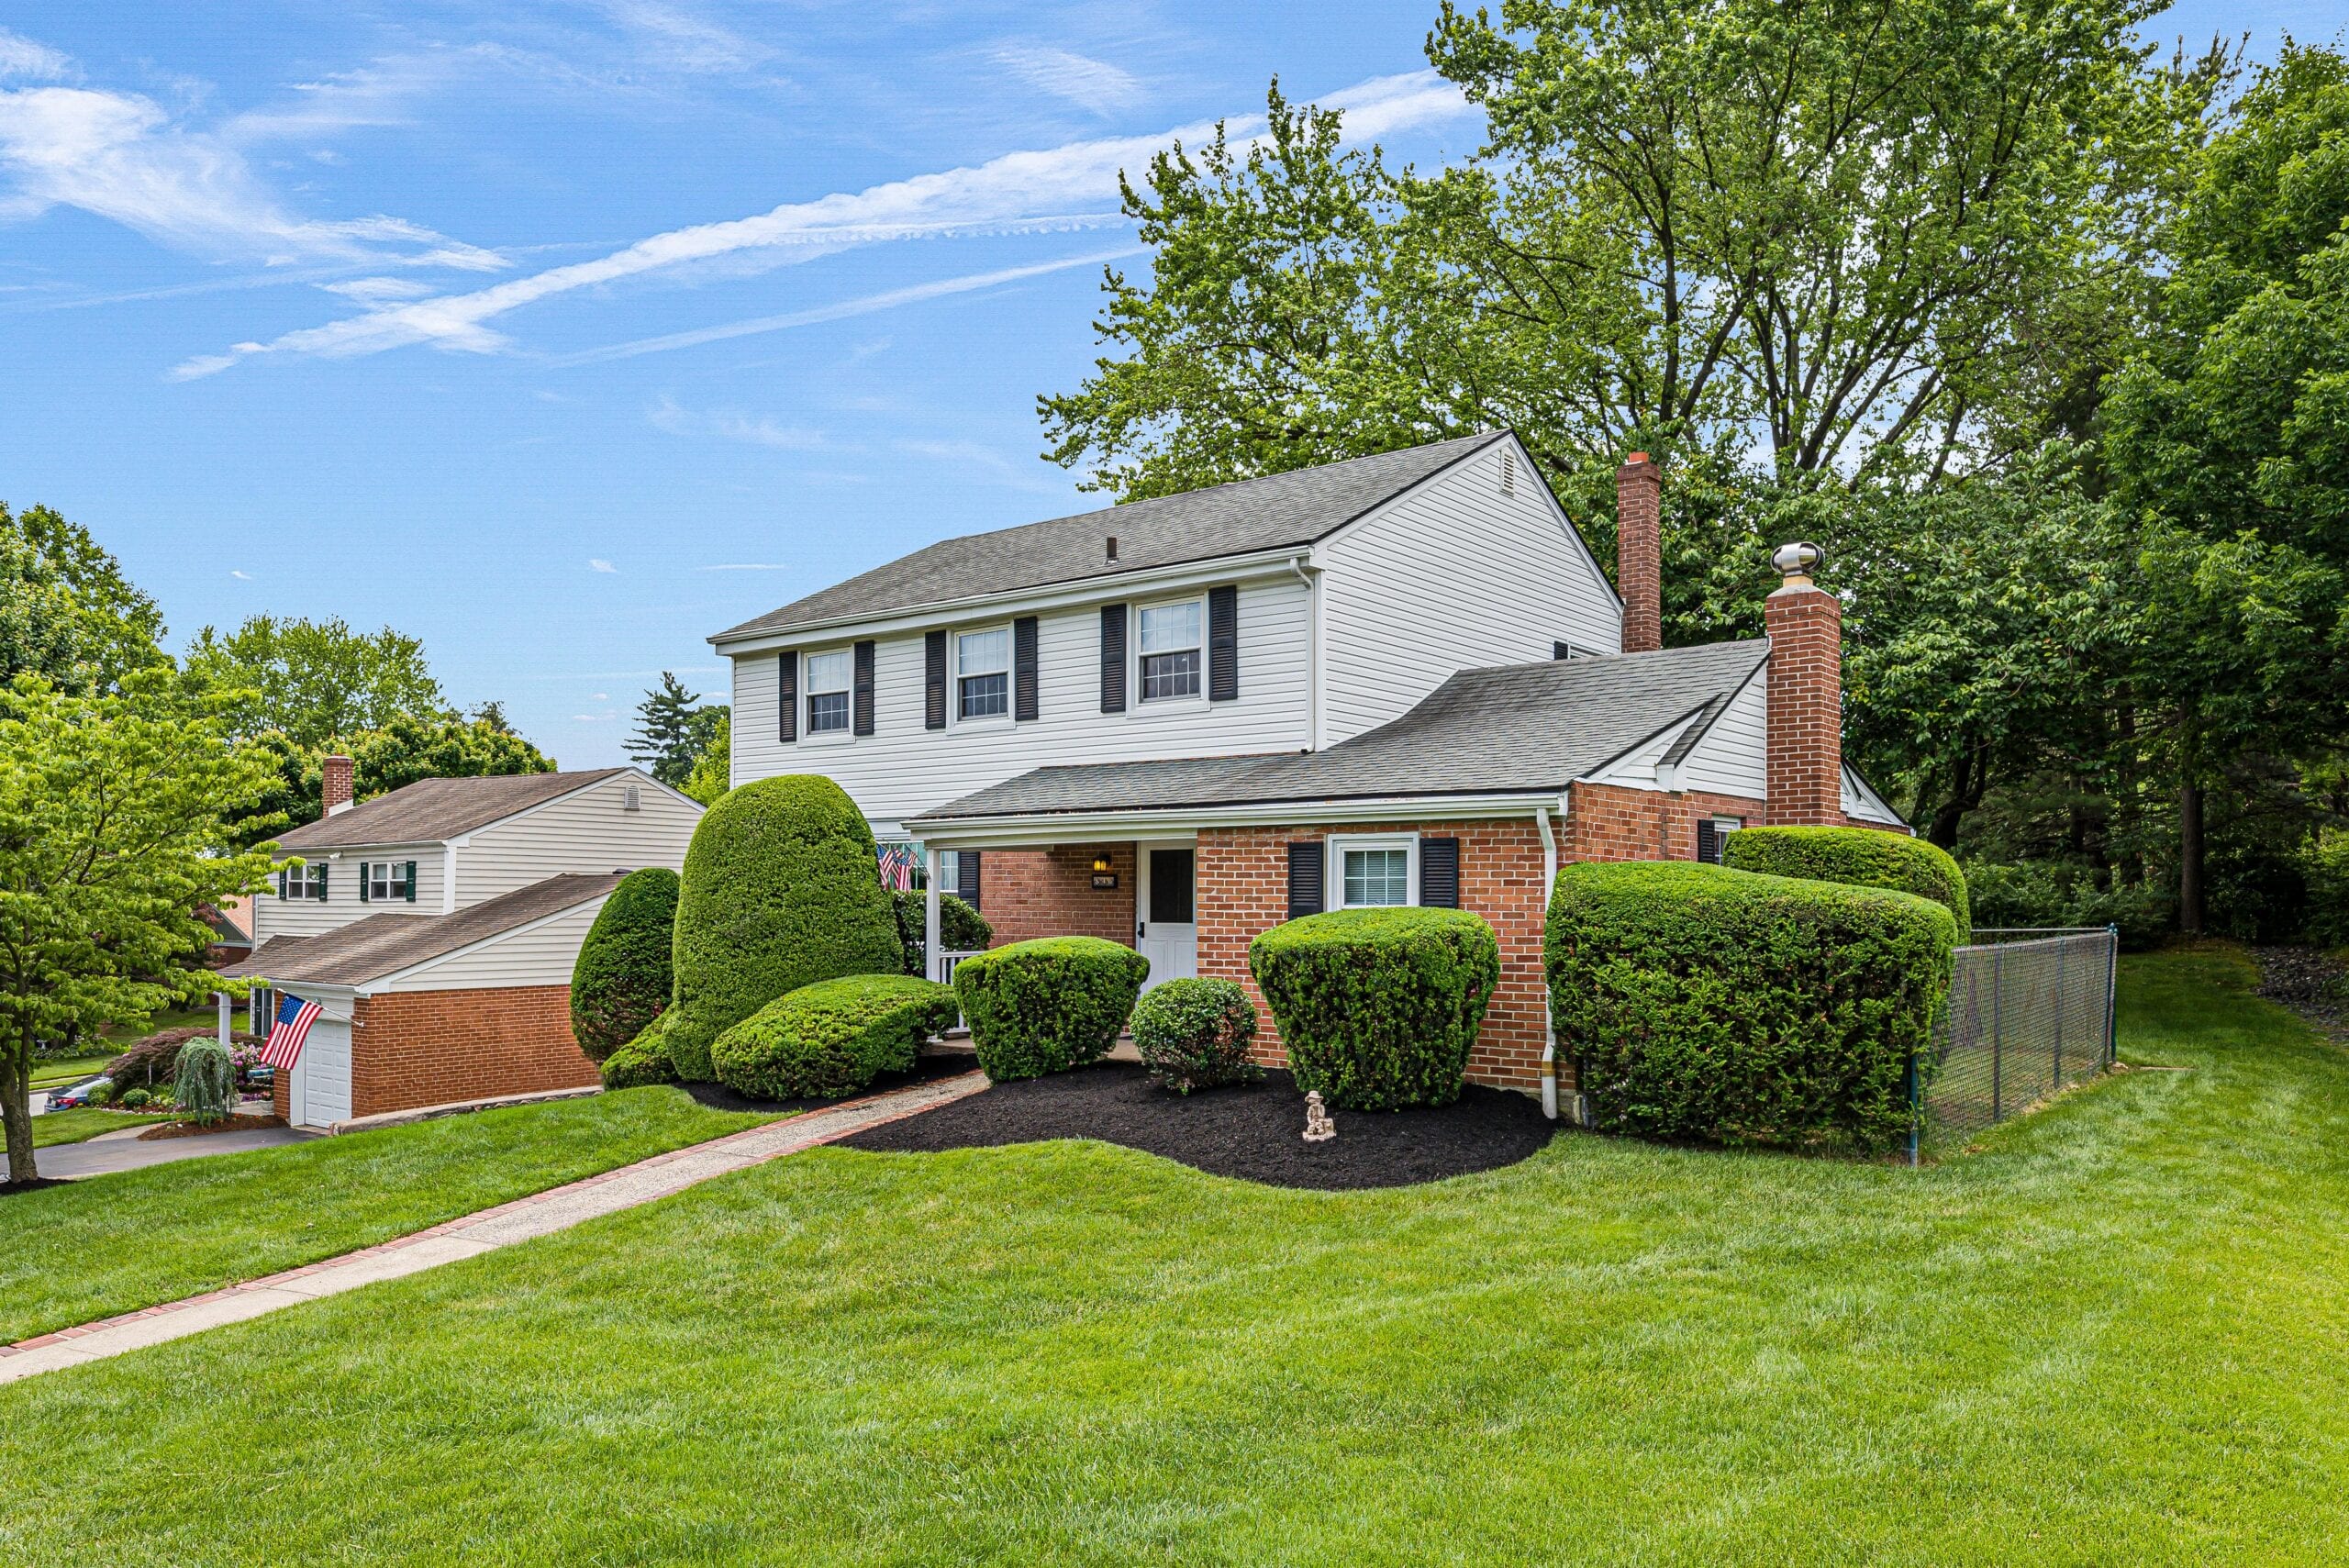 REAL ESTATE PHOTOGRAPHY CHESTER COUNTY DELAWARE COUNTY MONTGOMERY COUNTY